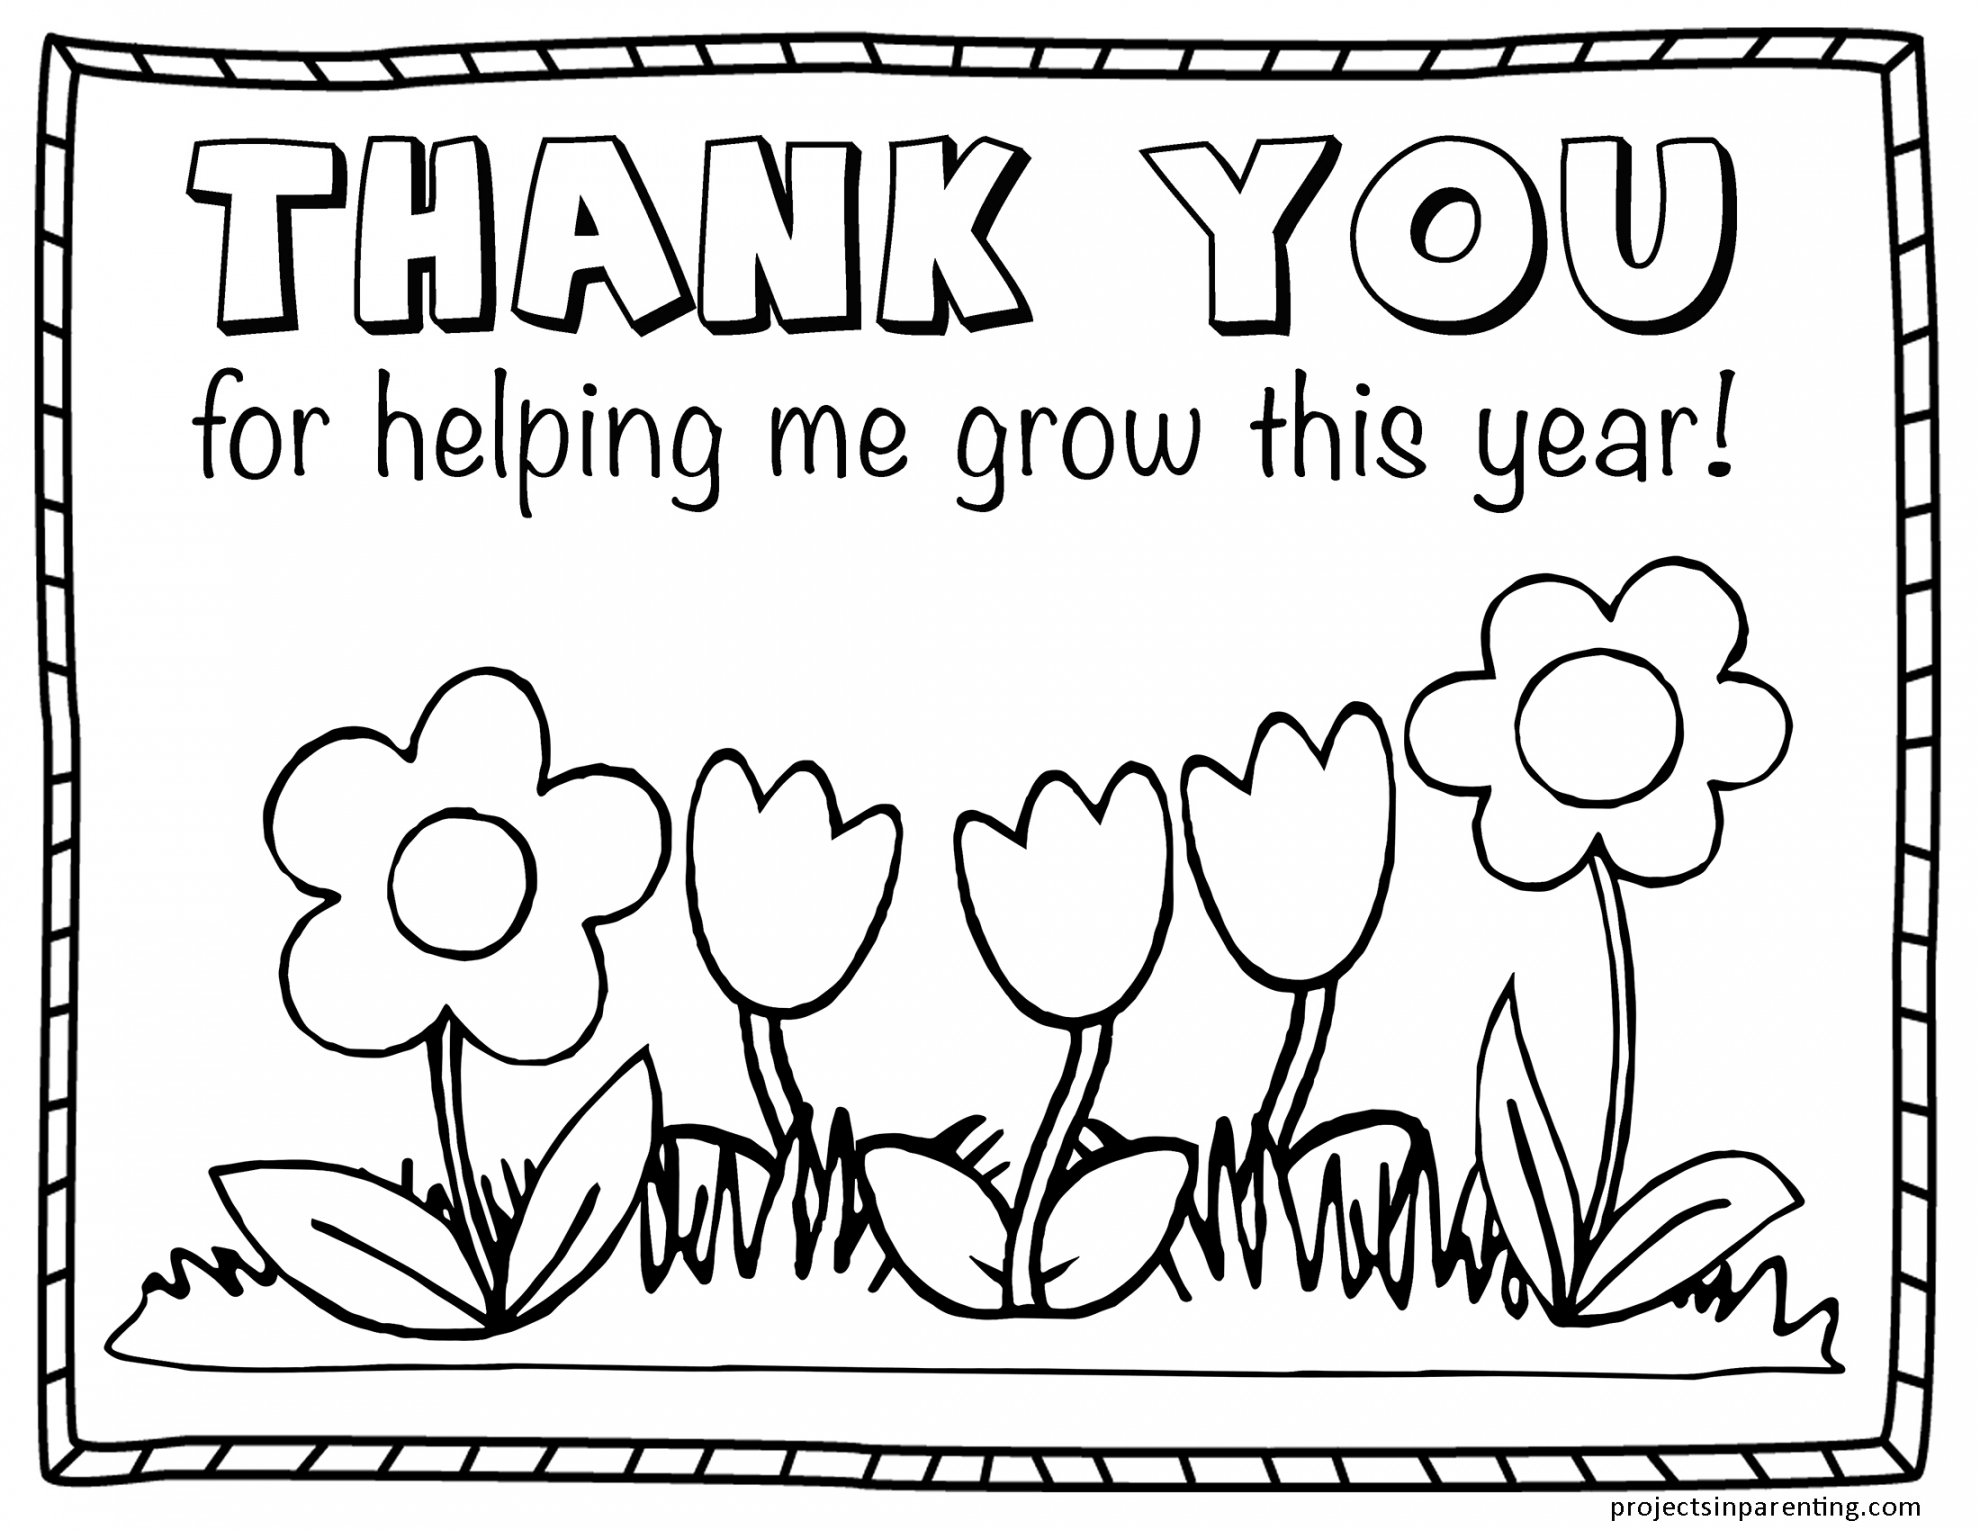 Teacher Appreciation Coloring Page  Projects In Parenting - FREE Printables - Free Printable Teacher Appreciation Cards To Color